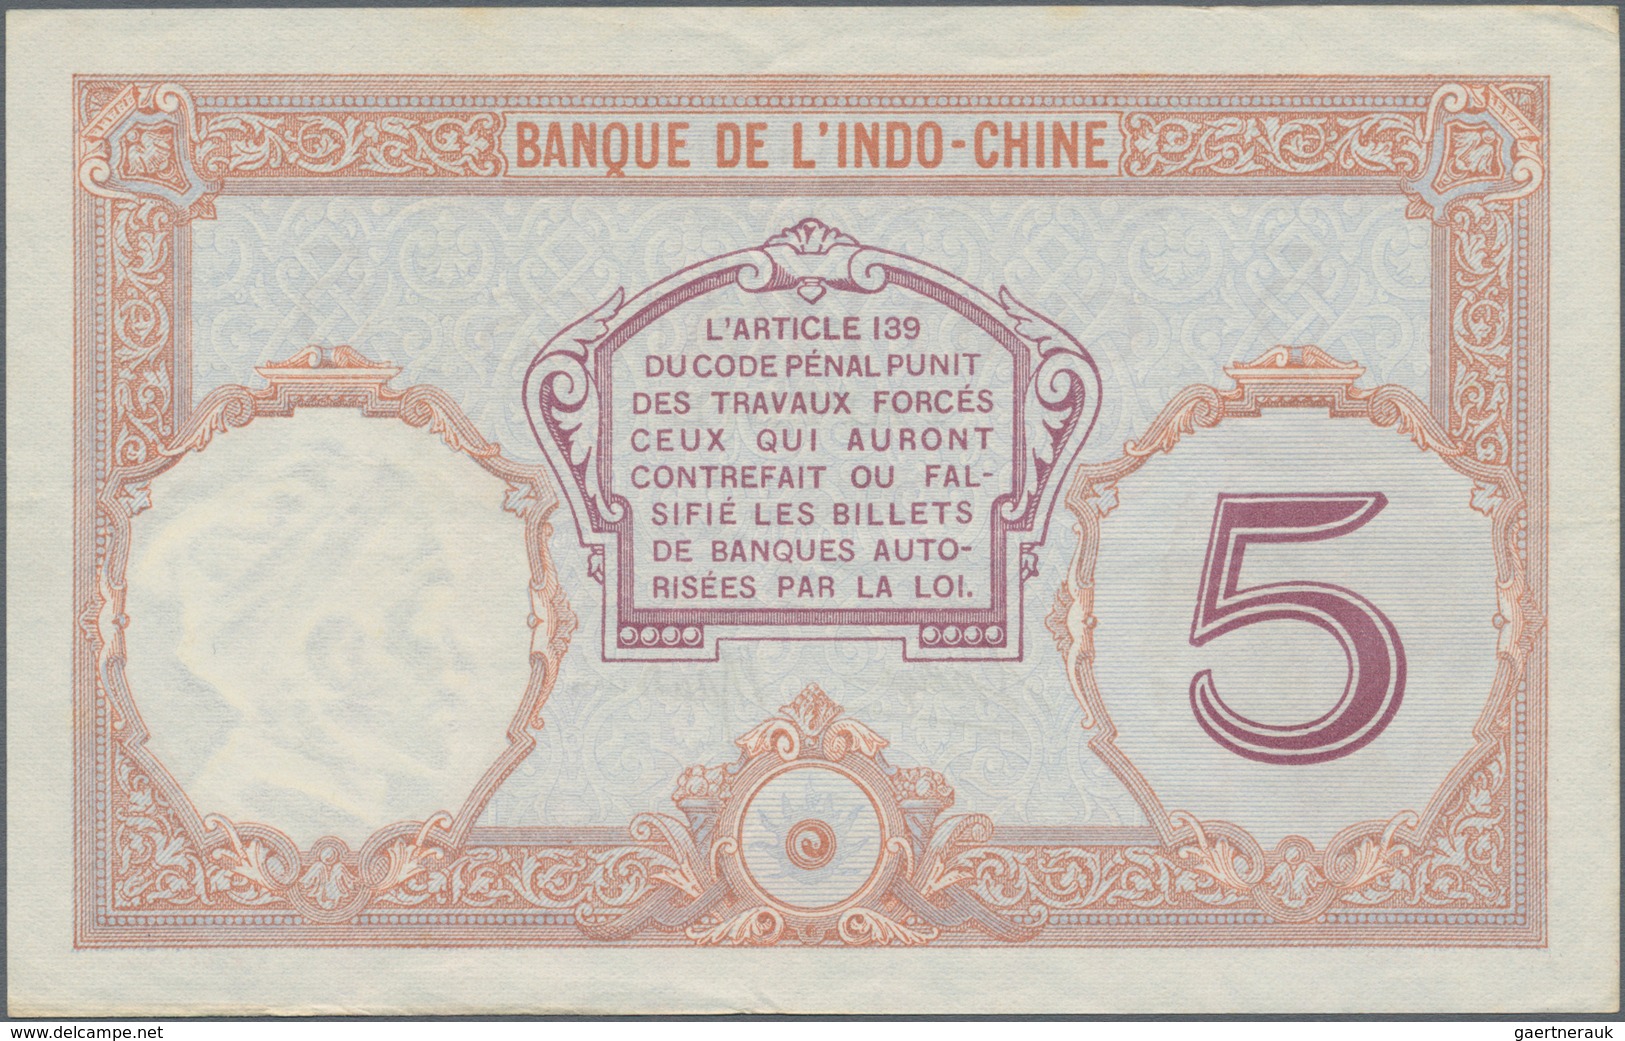 Tahiti: Banque De L'Indochine – Papeete 5 Francs ND(1927), P.11c, Great Condition With Strong Paper - Otros – Oceanía